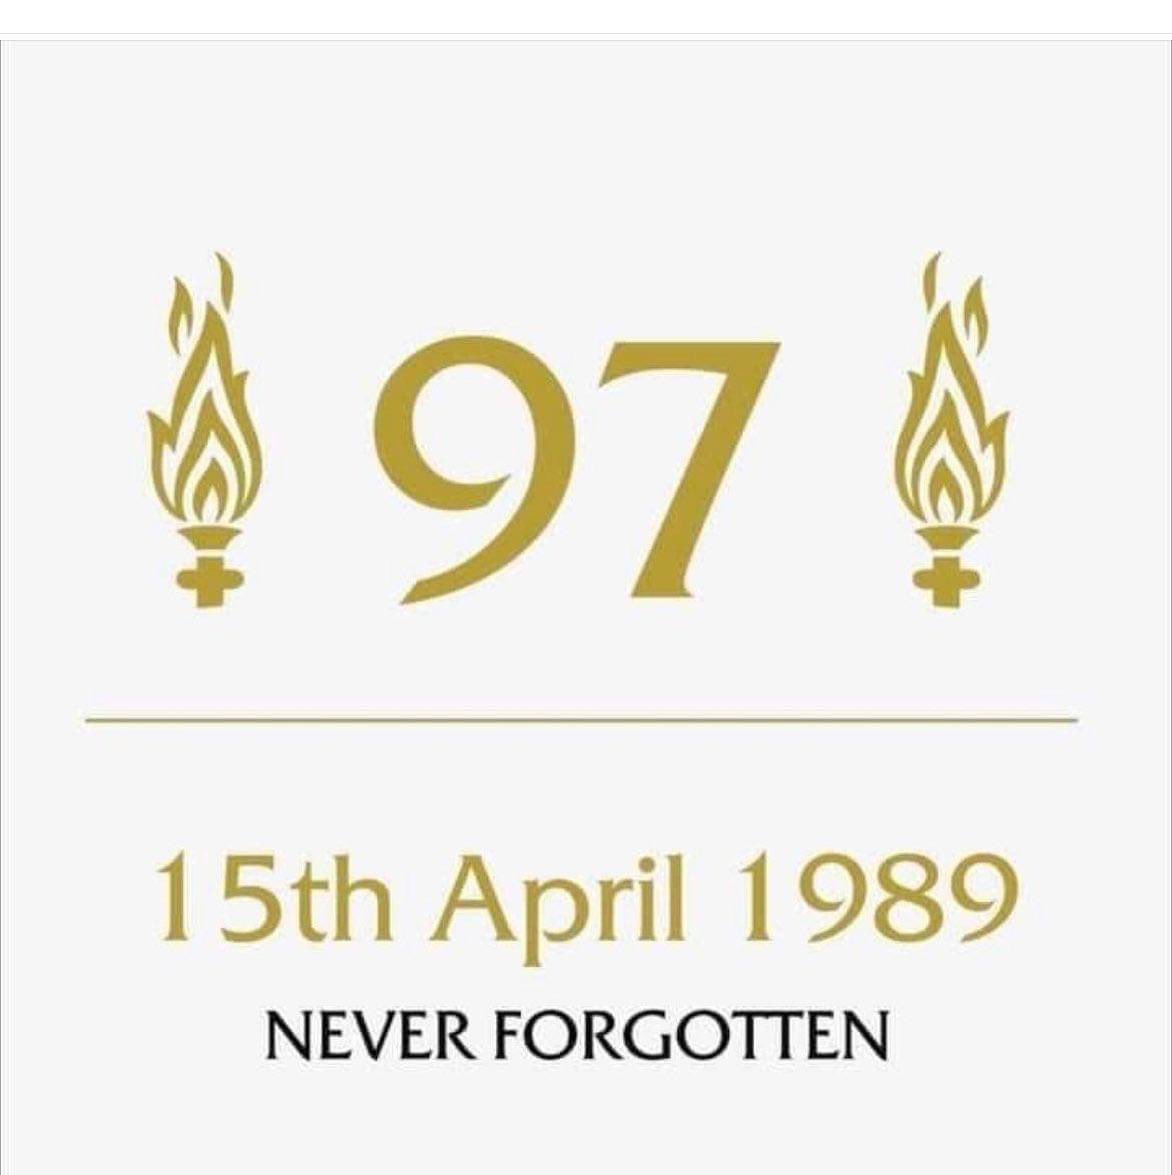 Borrowed from Twitter 

I'm an Evertonian 
As fervent as the next
But for one day each year
I give that a rest

Remember 96+1 brothers and sisters
Who never came home
Nil Satis Nisi Optimum
You’ll Never Walk Alone

NSNO YNWA https://t.co/weIKH74lbW